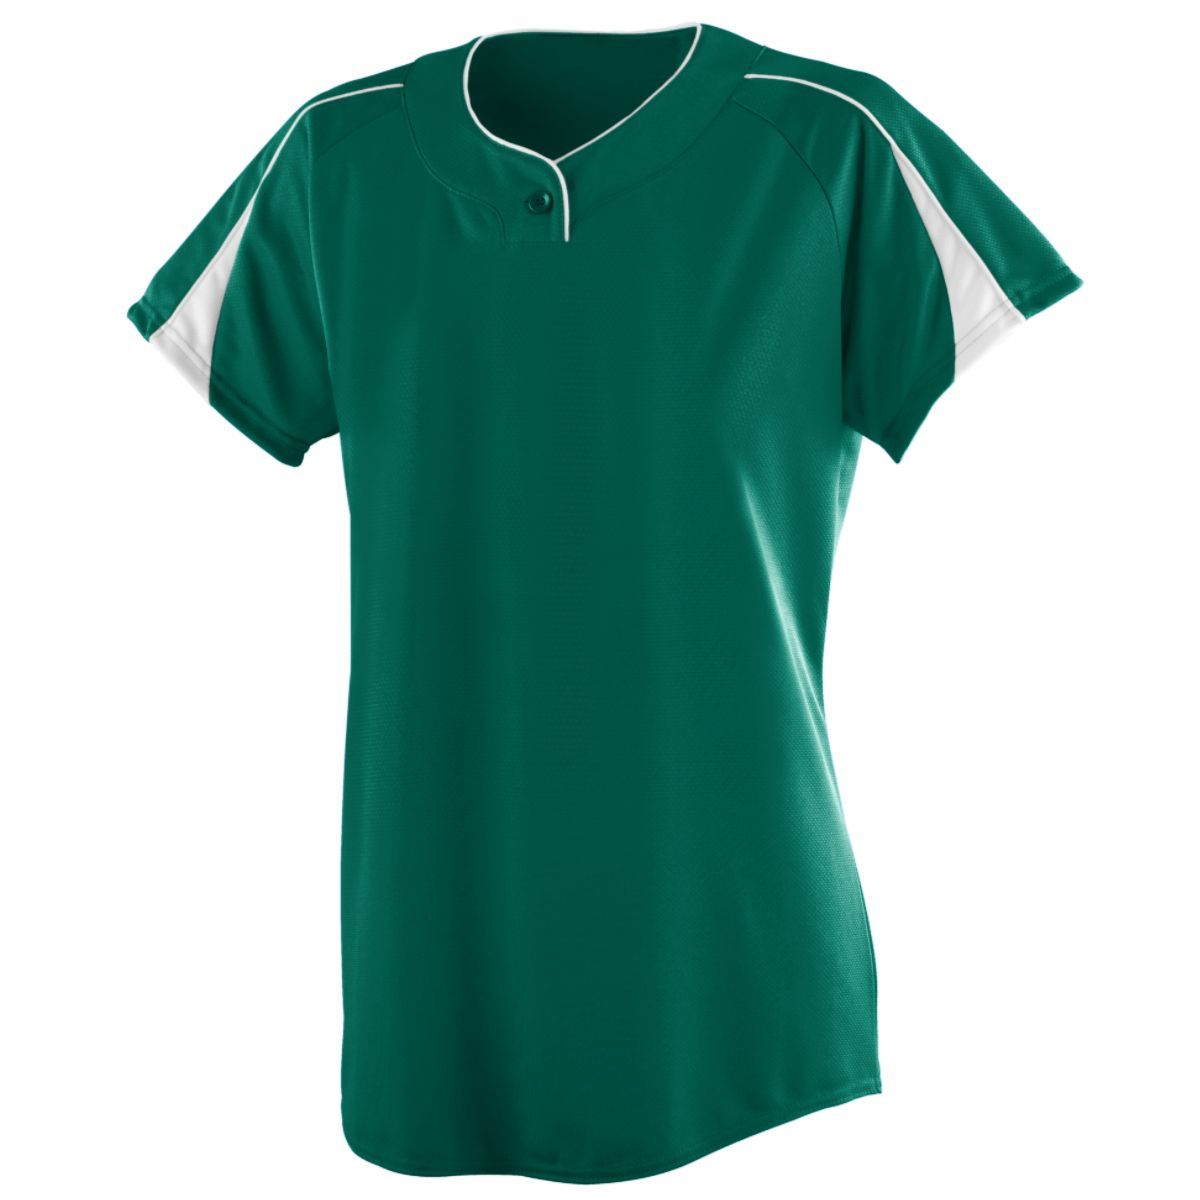 Augusta Sportswear Ladies Diamond Jersey in Dark Green/White  -Part of the Ladies, Ladies-Jersey, Augusta-Products, Softball, Shirts product lines at KanaleyCreations.com